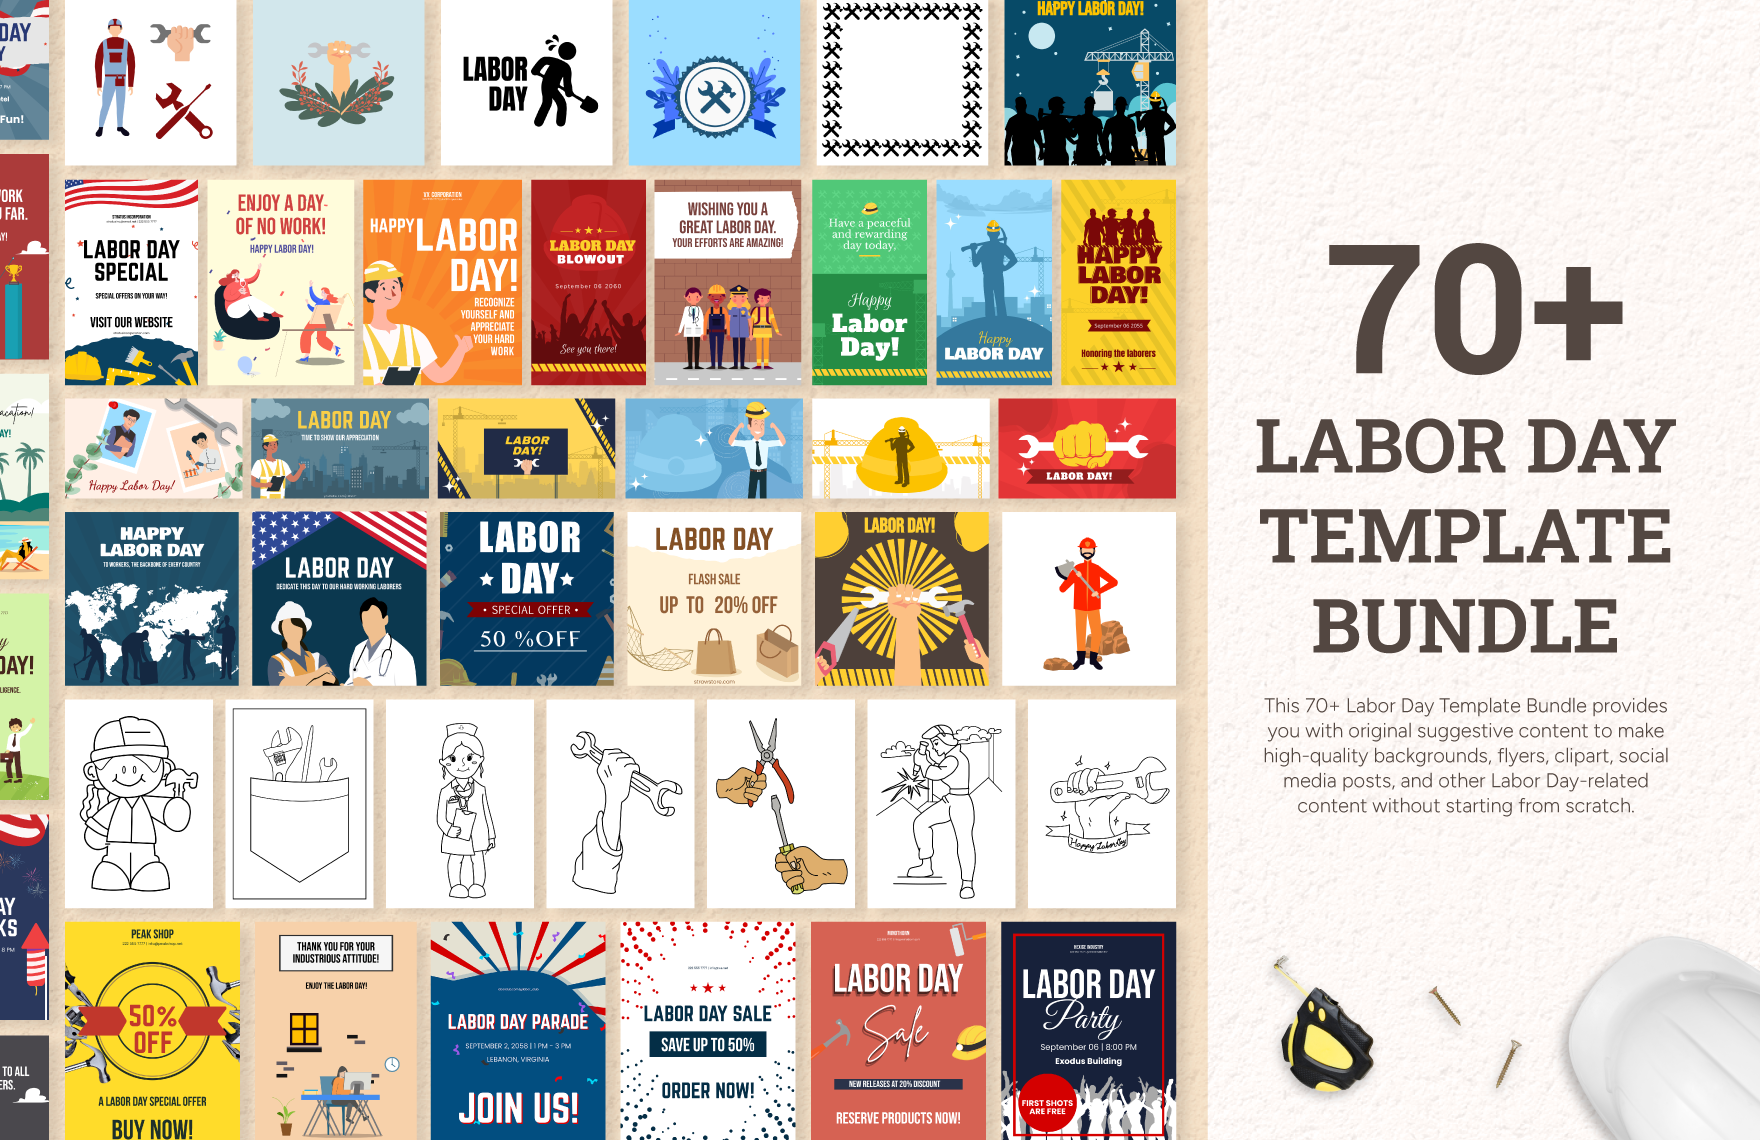 Labor Day Format Template in PSD